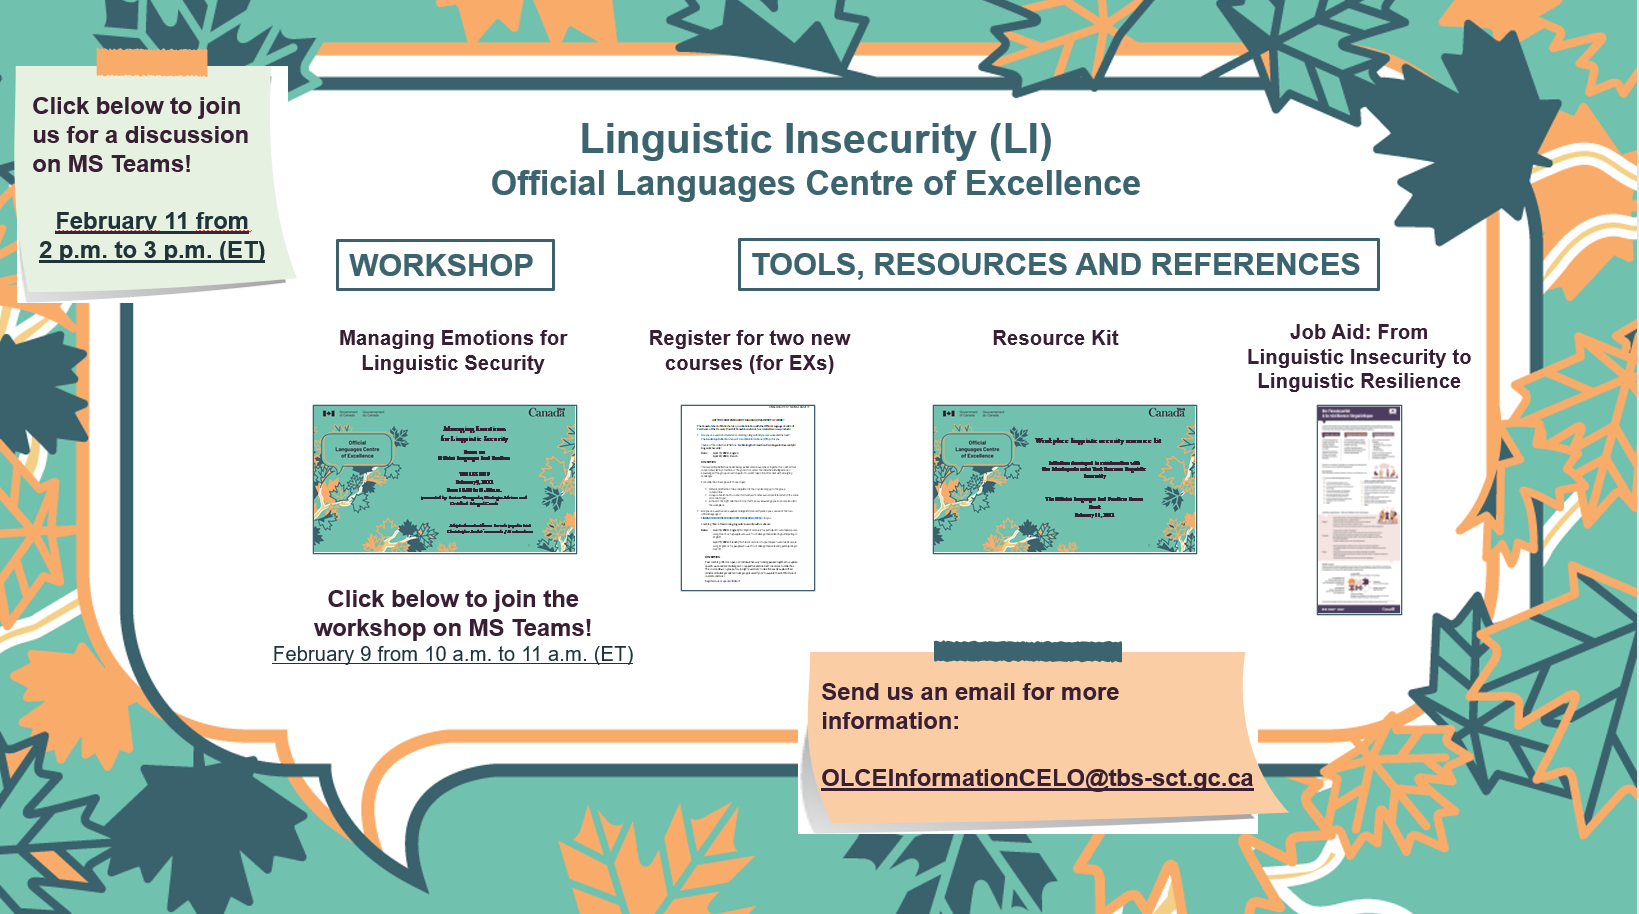 Kiosk on linguistic insecurity